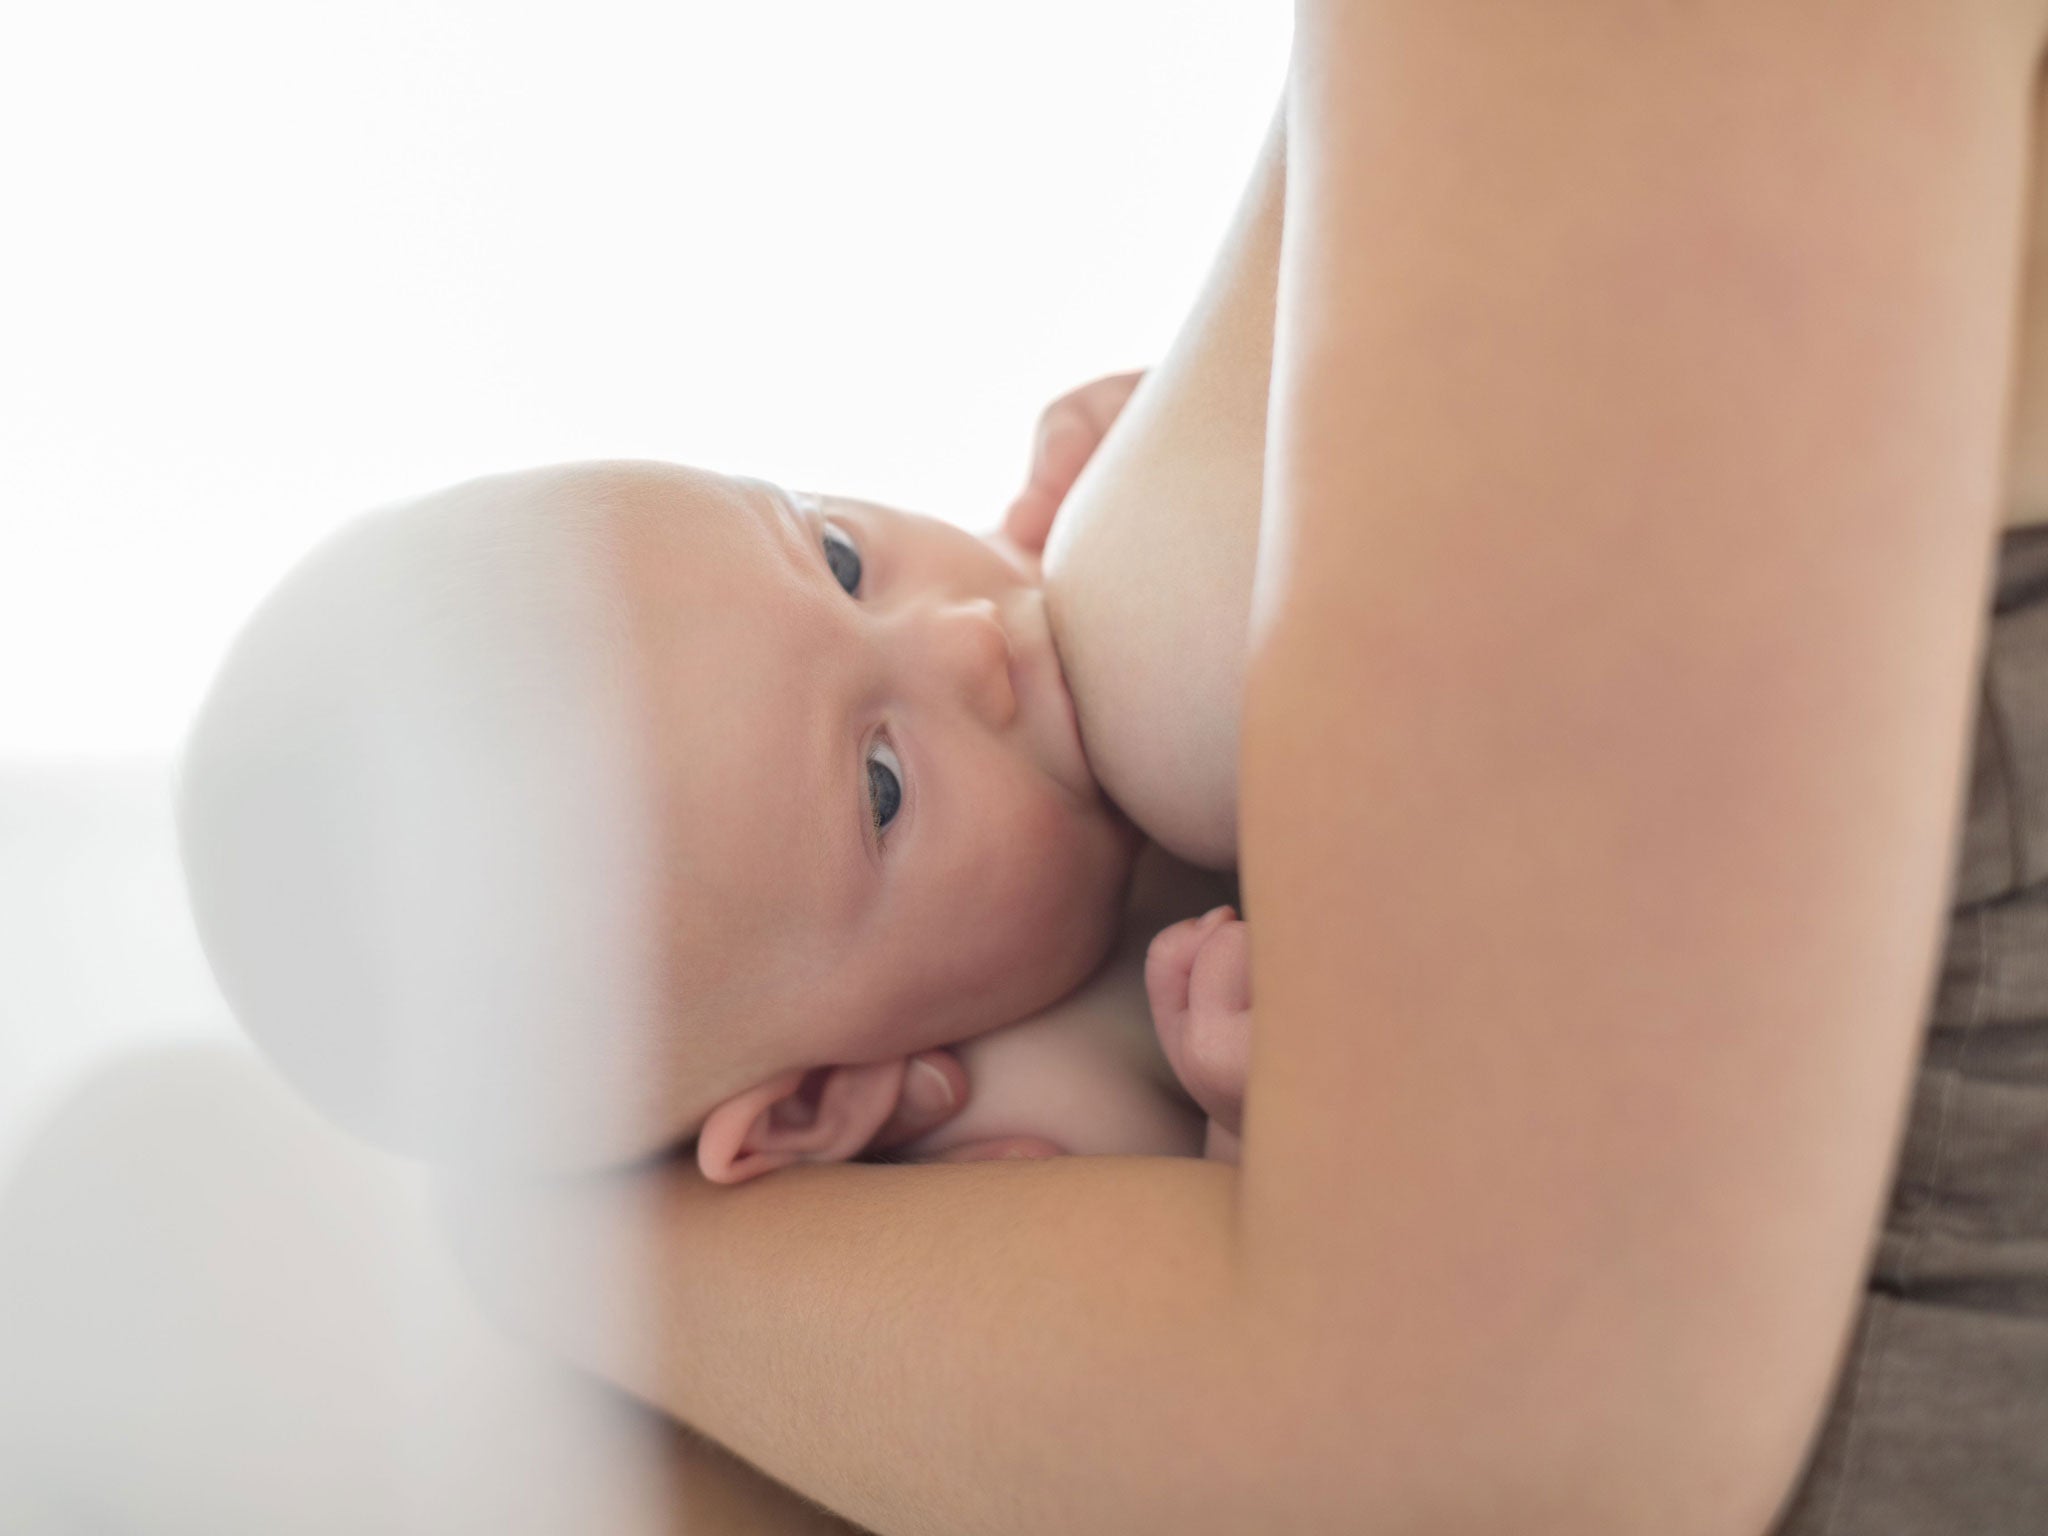 The BBC asked an interviewee to redo an answer to avoid mentioning damaged nipples - the main symptom for diagnosing tongue-tie in breastfeeding babies